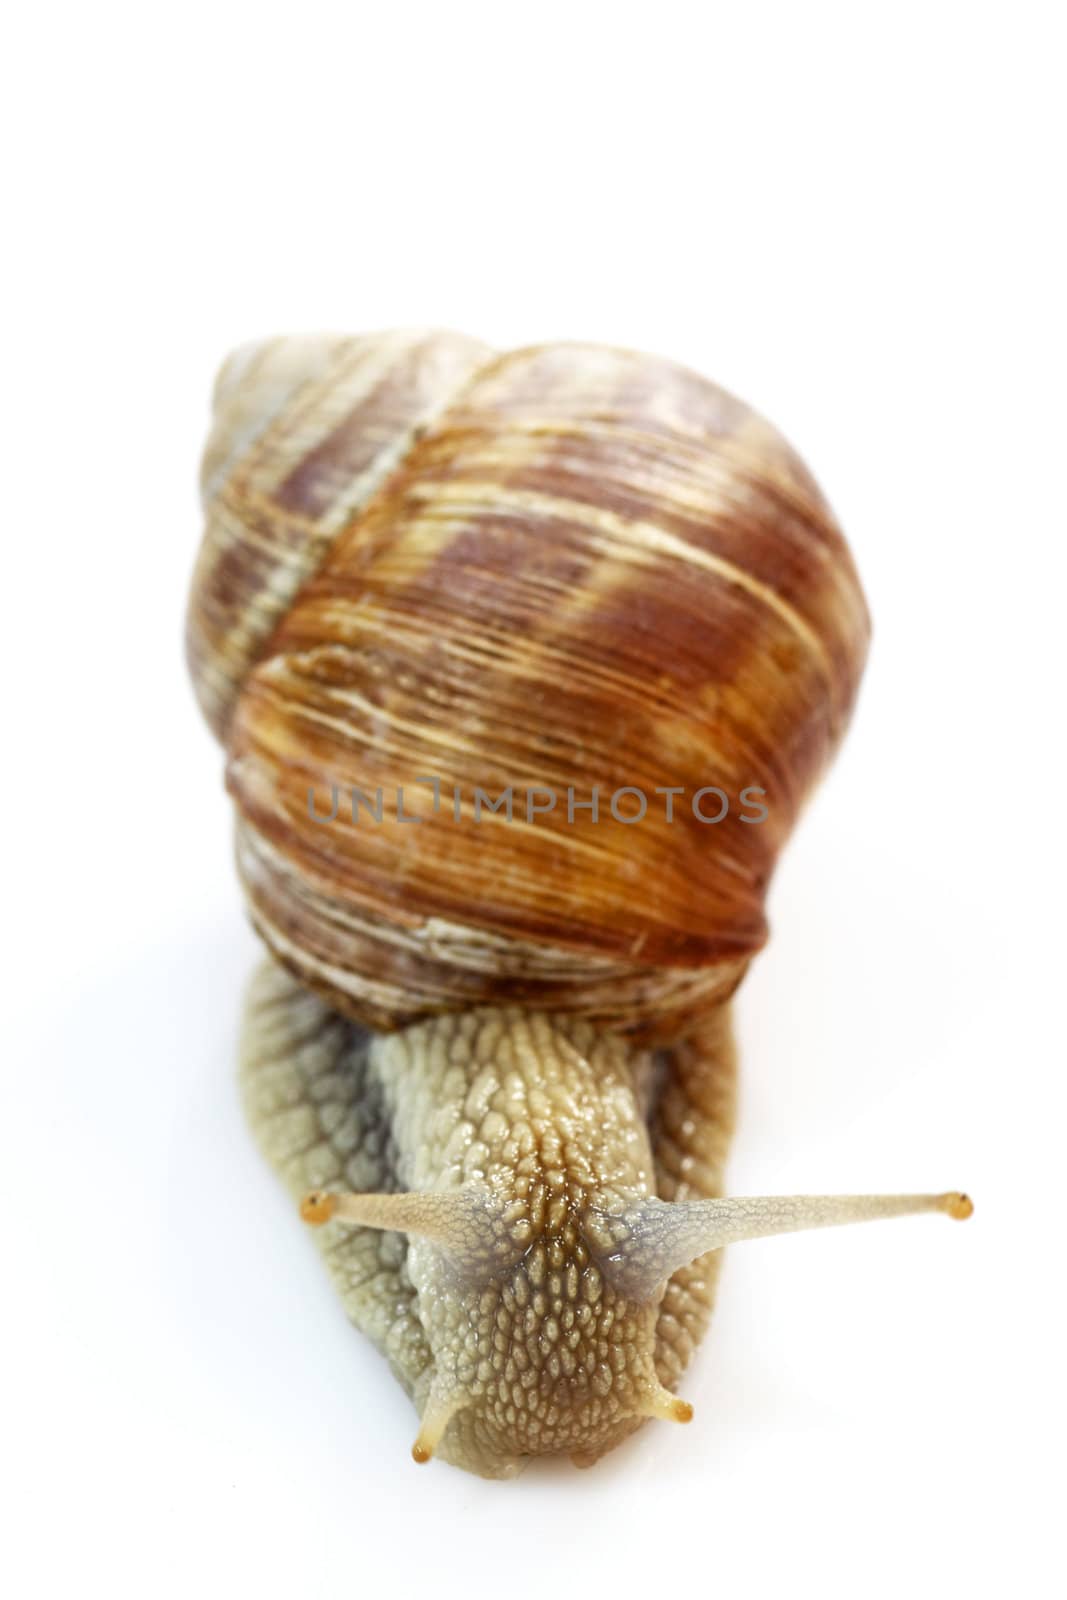 Snail with shell on bright background